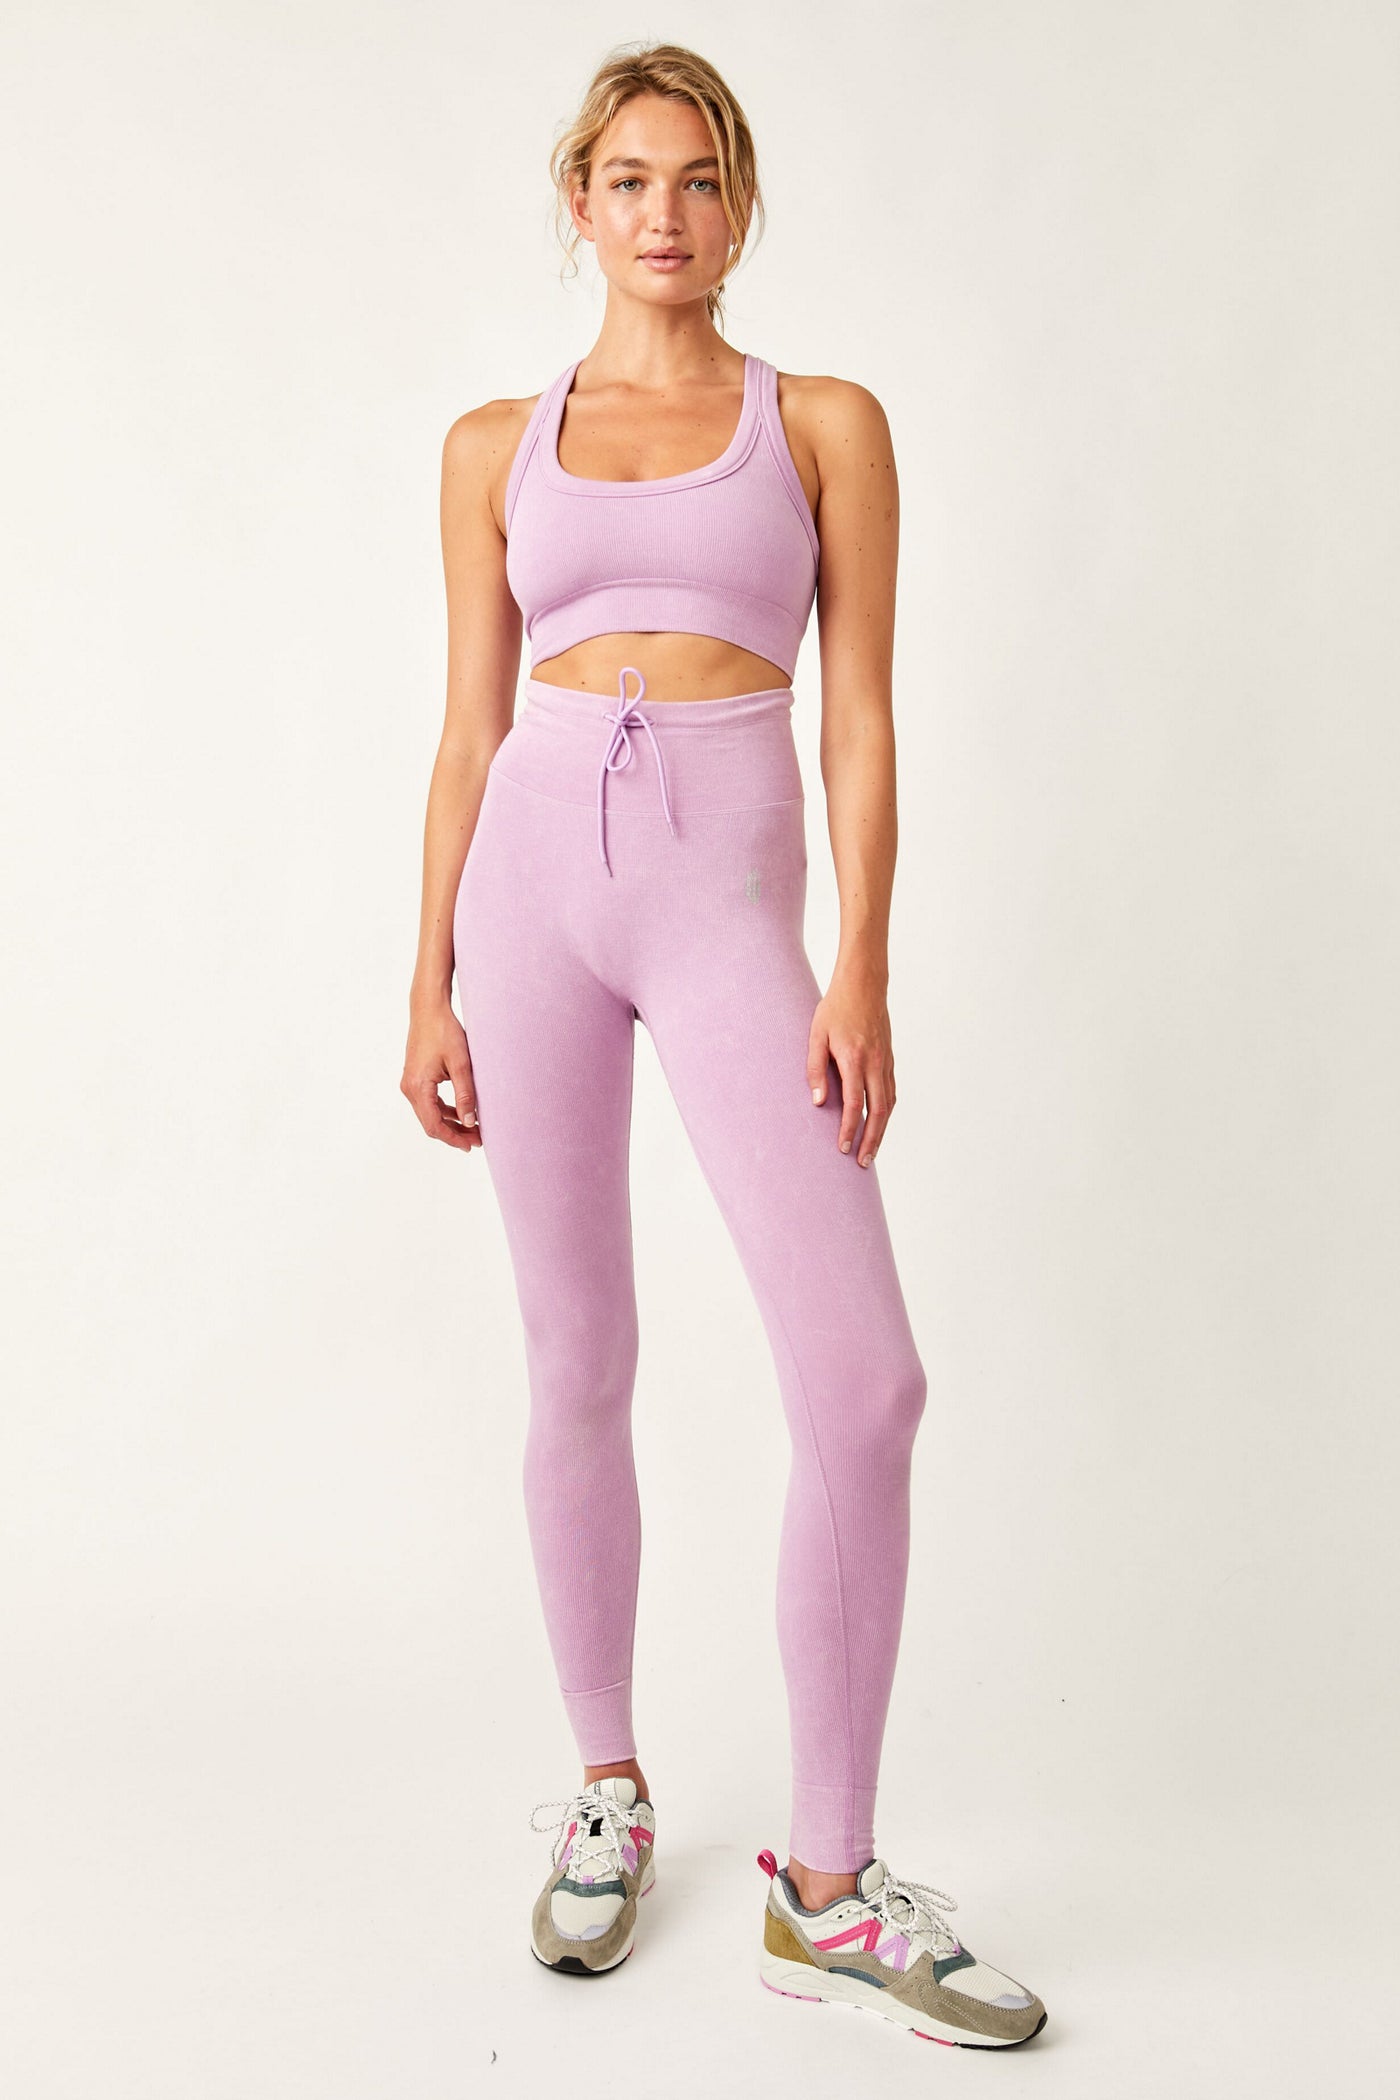 Free People Go To Legging - Chive Blossom